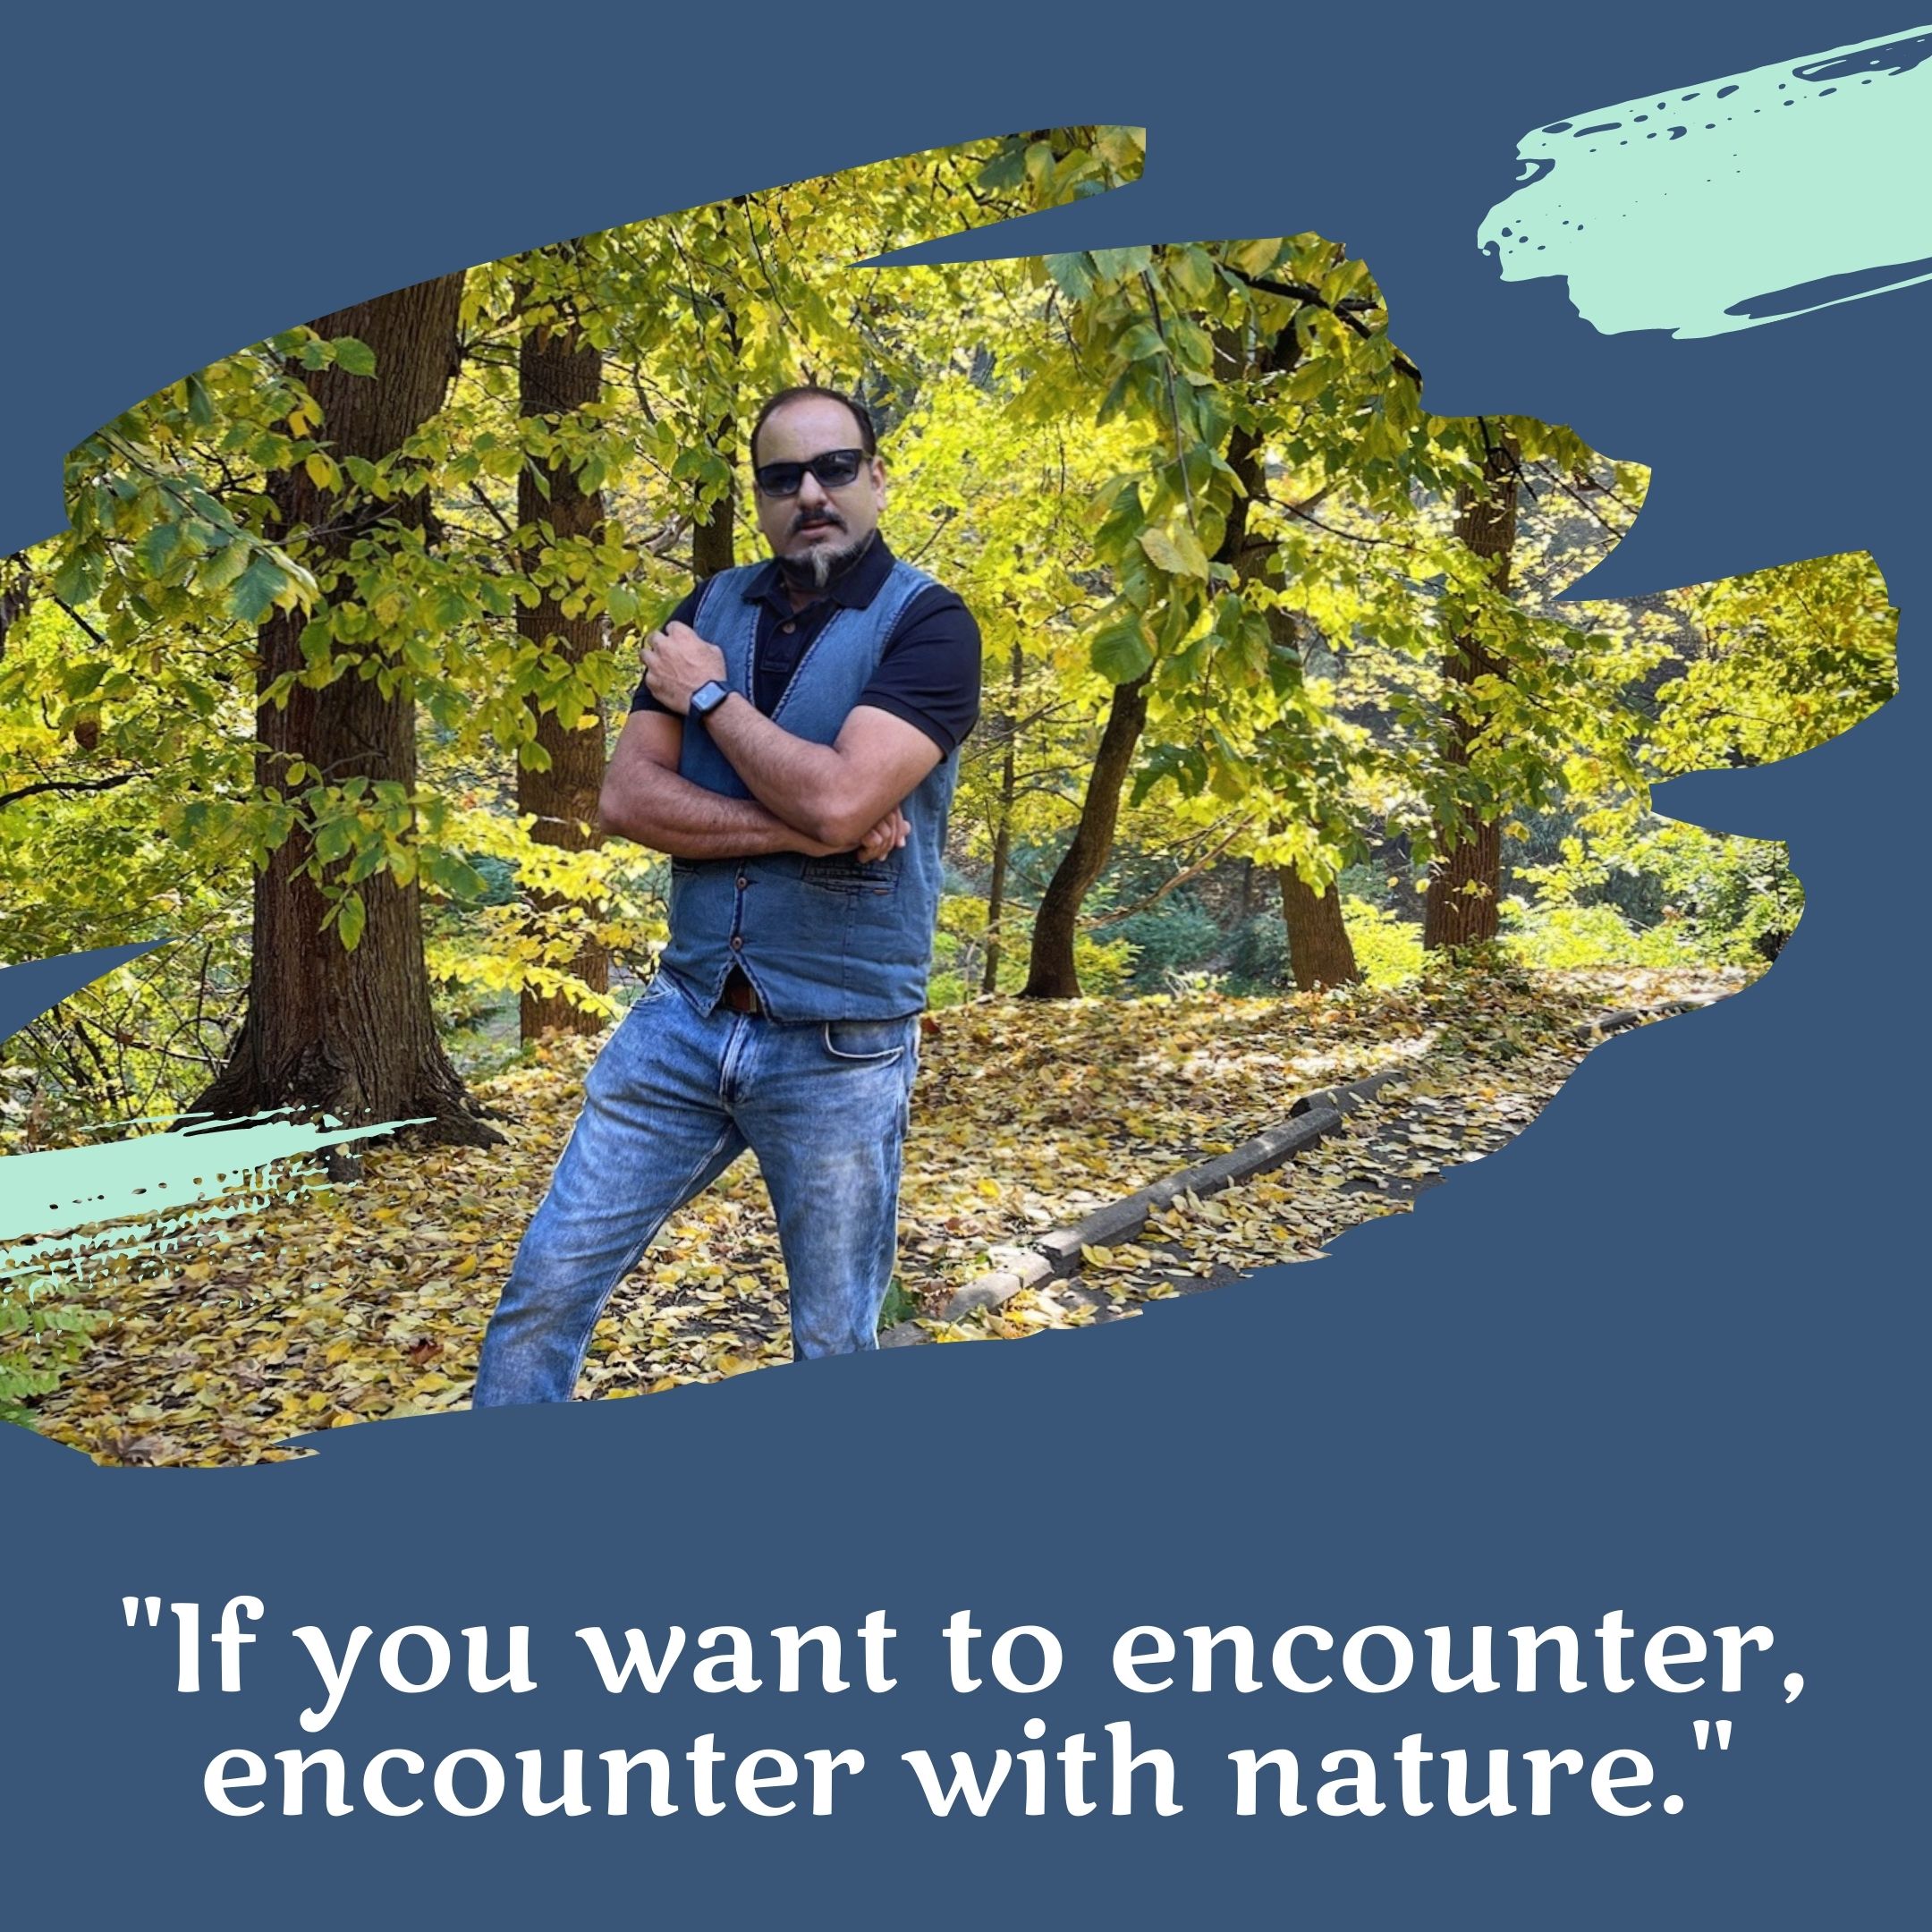 If you want to encounter, encounter with nature.